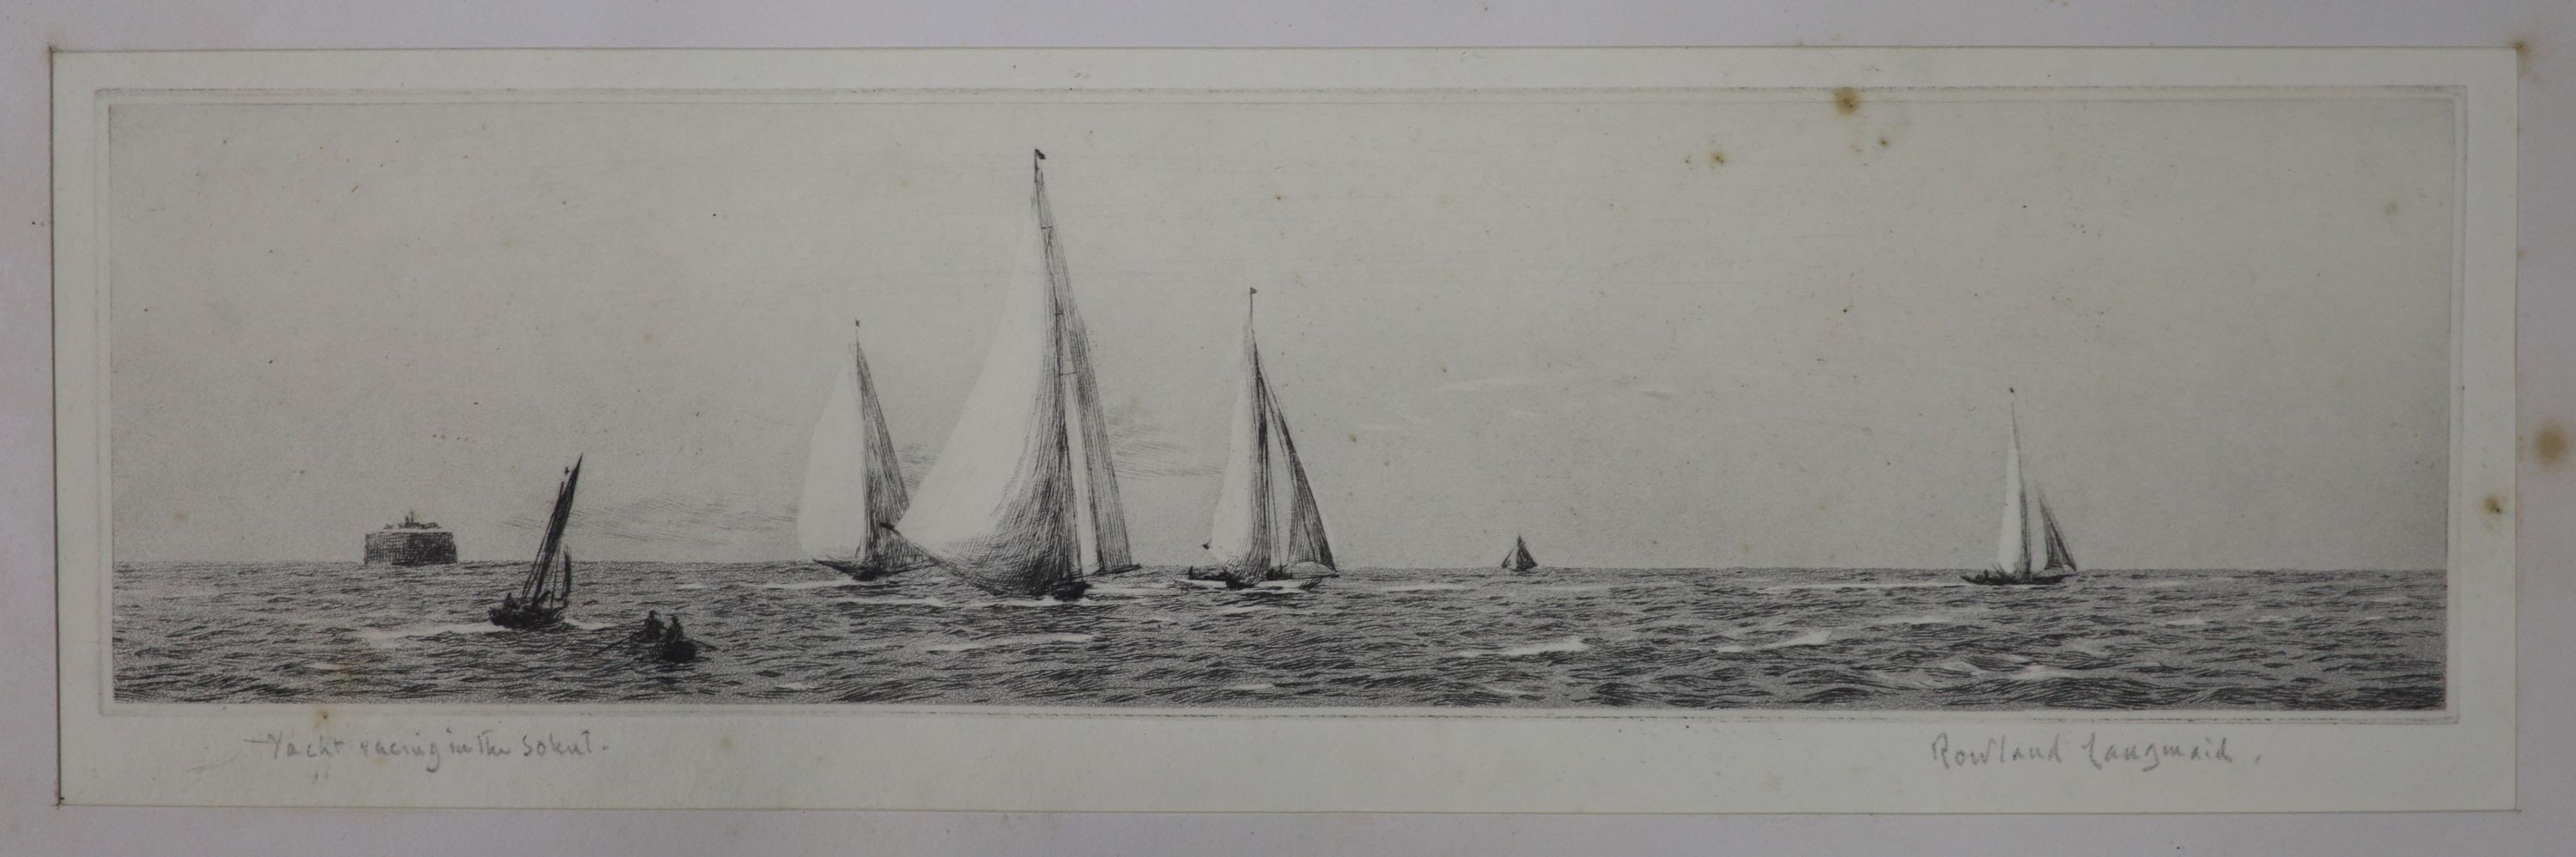 Rowland Langmaid (1897-1956), drypoint etching, Yacht racing in the Solent, signed in pencil, 8.5 x 32cm